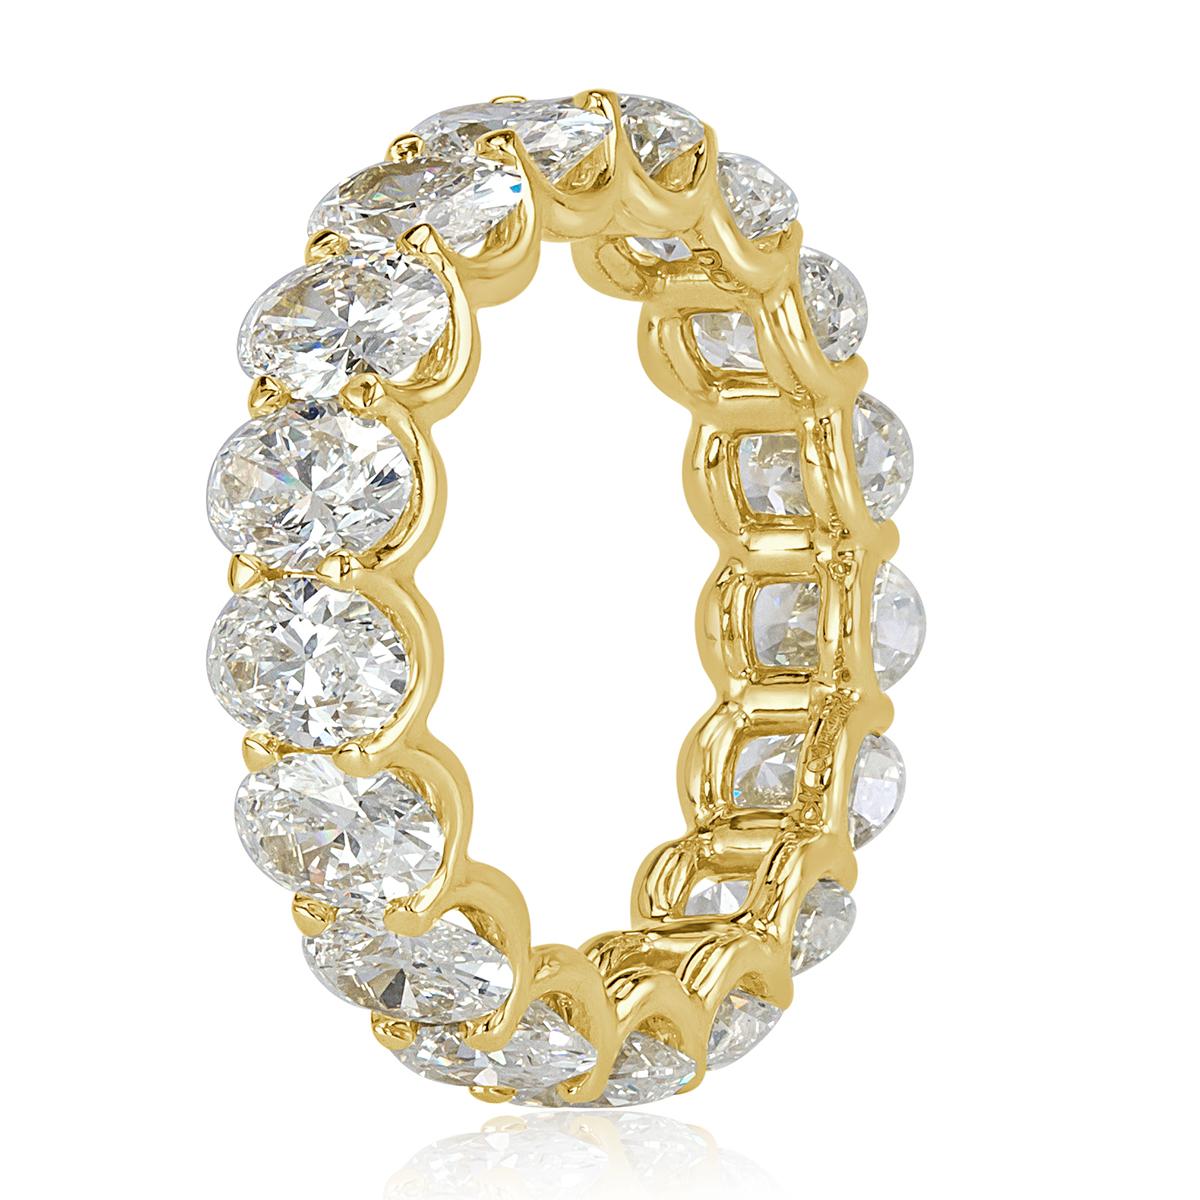 This striking diamond eternity band showcases 5.54ct of oval cut diamonds graded at E-F, VS1-VS2. The diamonds are beautifully matched and hand set in 18k yellow gold. All eternity bands are shown in a size 6.5. We custom craft each eternity band